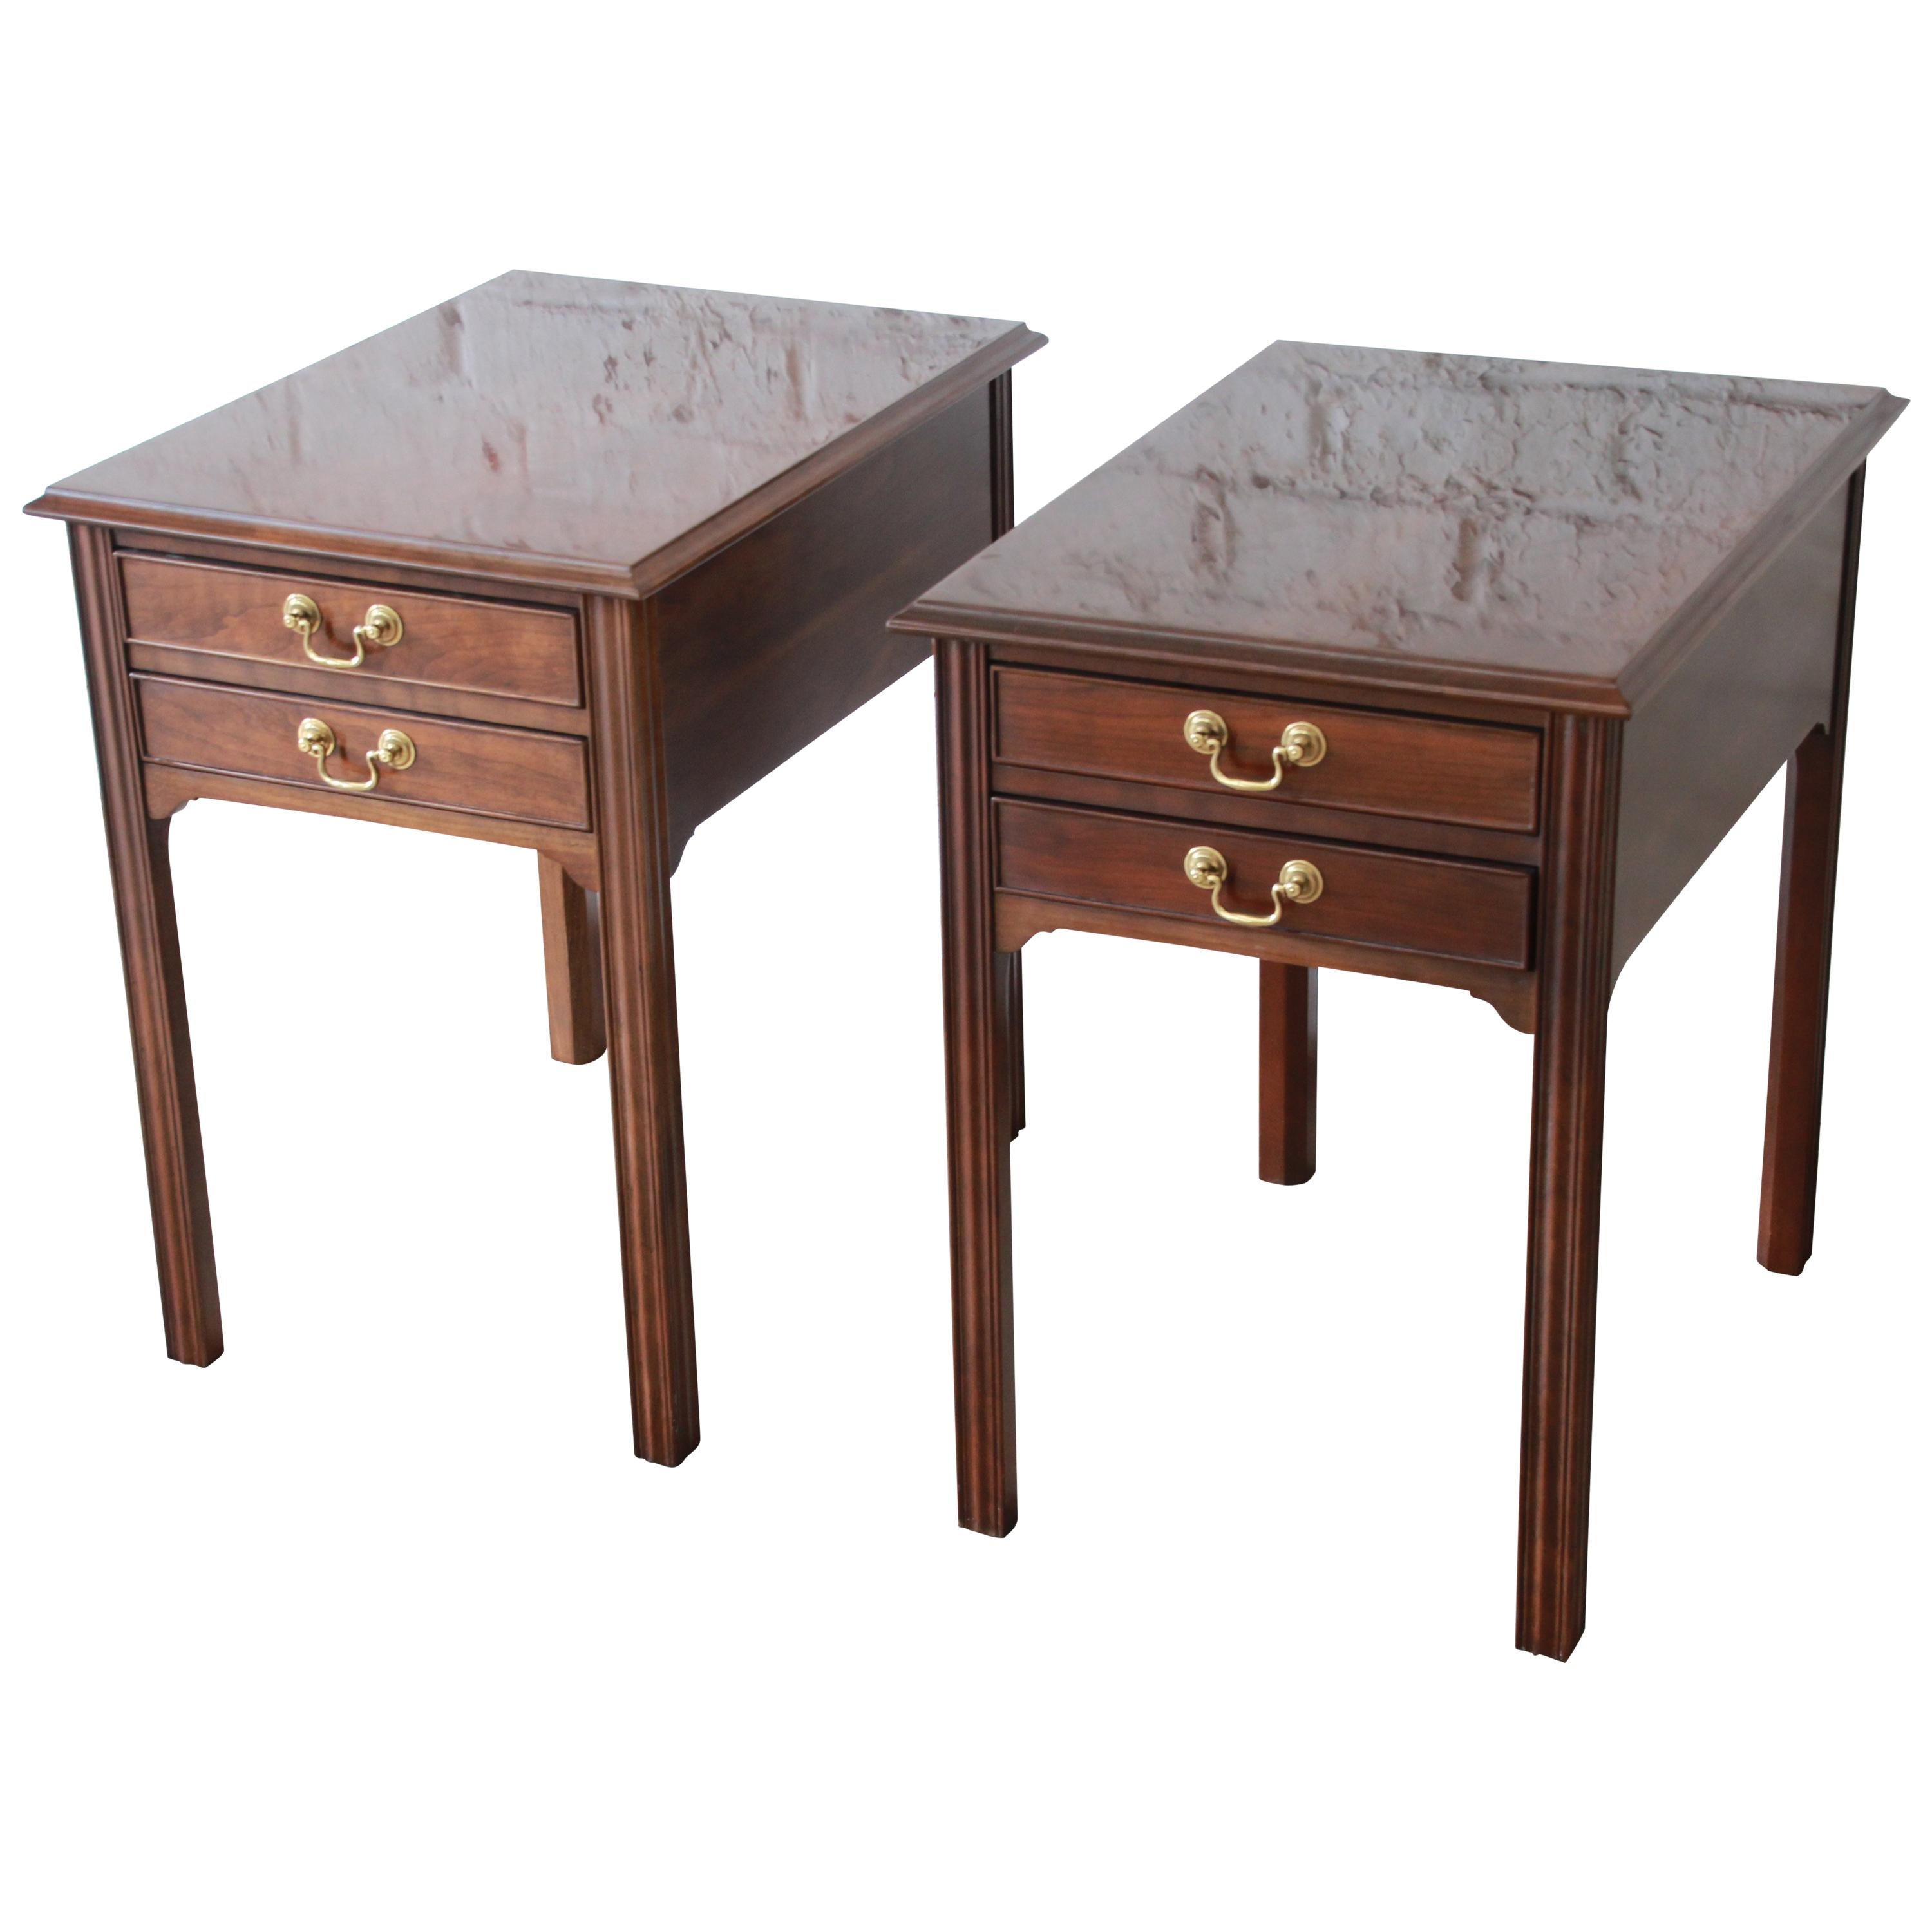 L. & J. G. Stickley Georgian Style Cherrywood Nightstands or End Tables, Pair